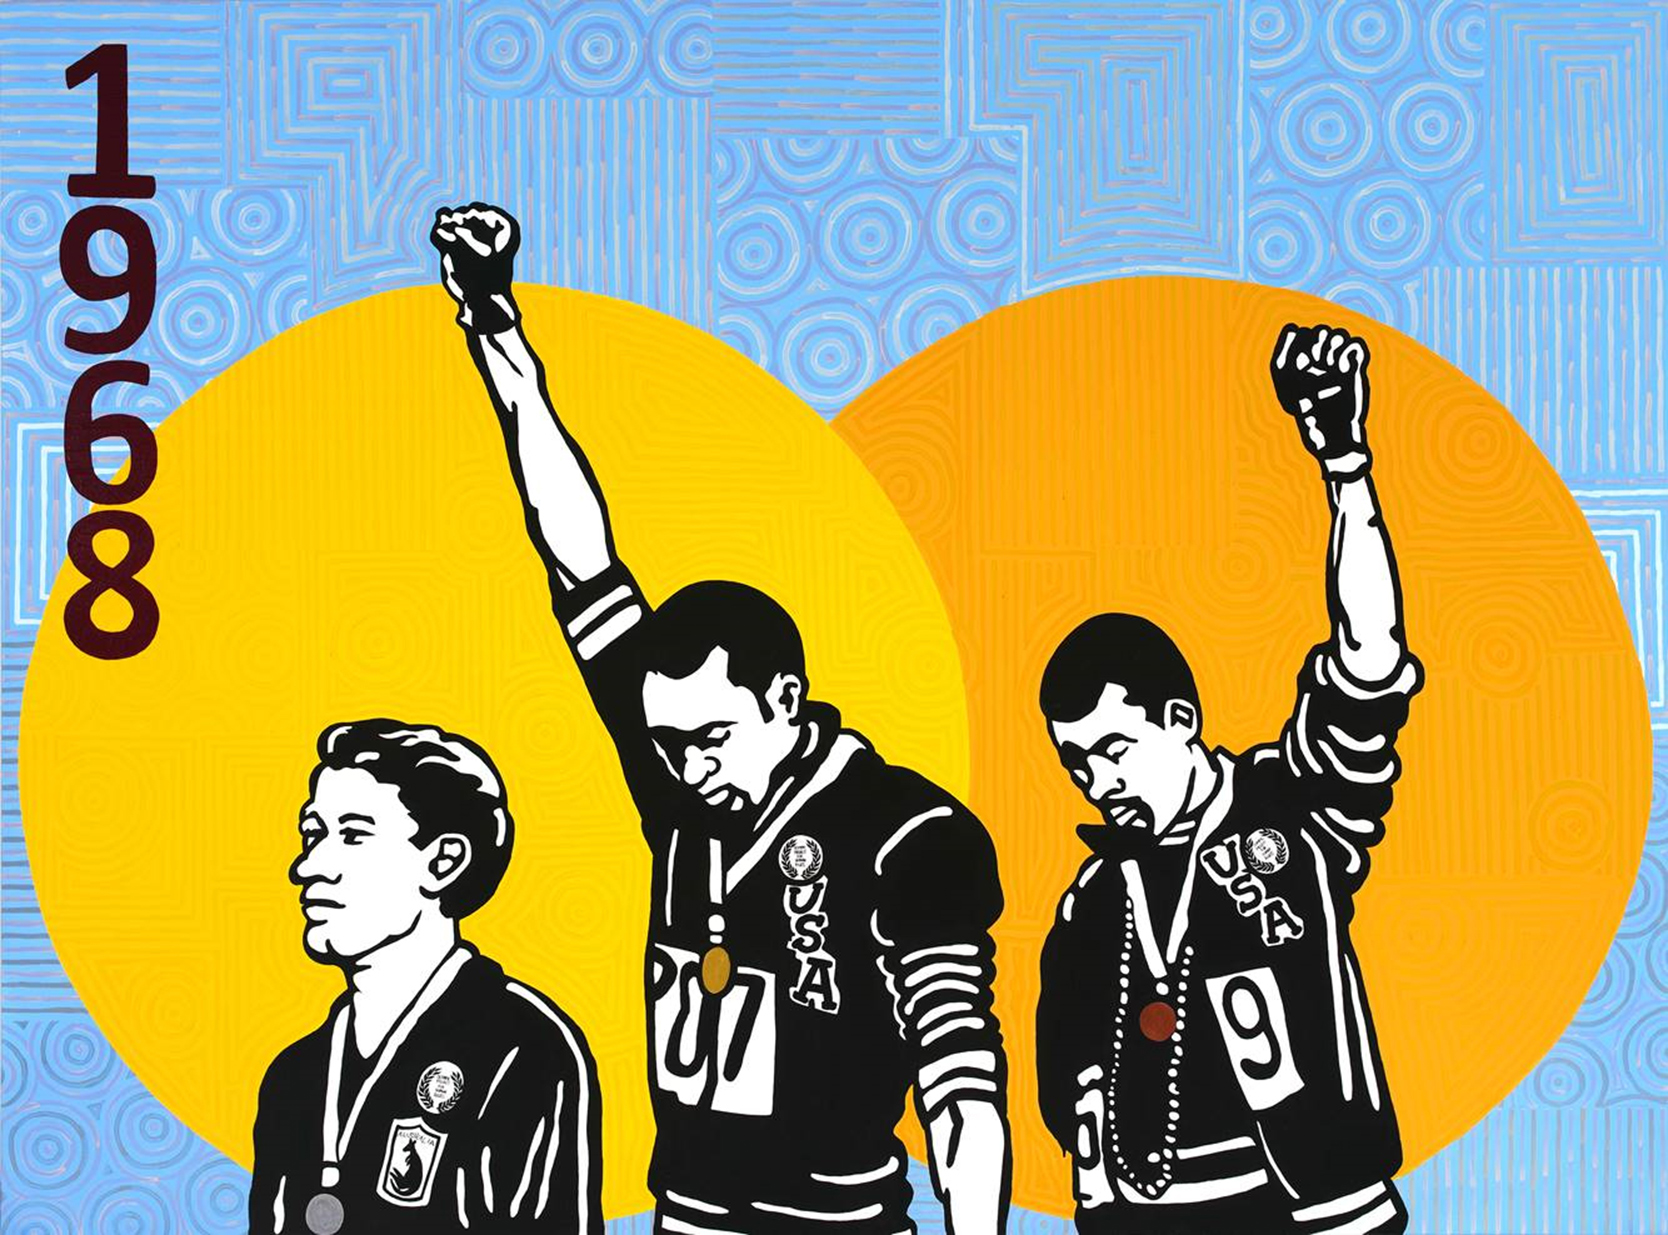 Three athletes on a winners podium, the two black athletes have their heads bowed and fists raised. The numbers 1968 are written down the left side of the image.